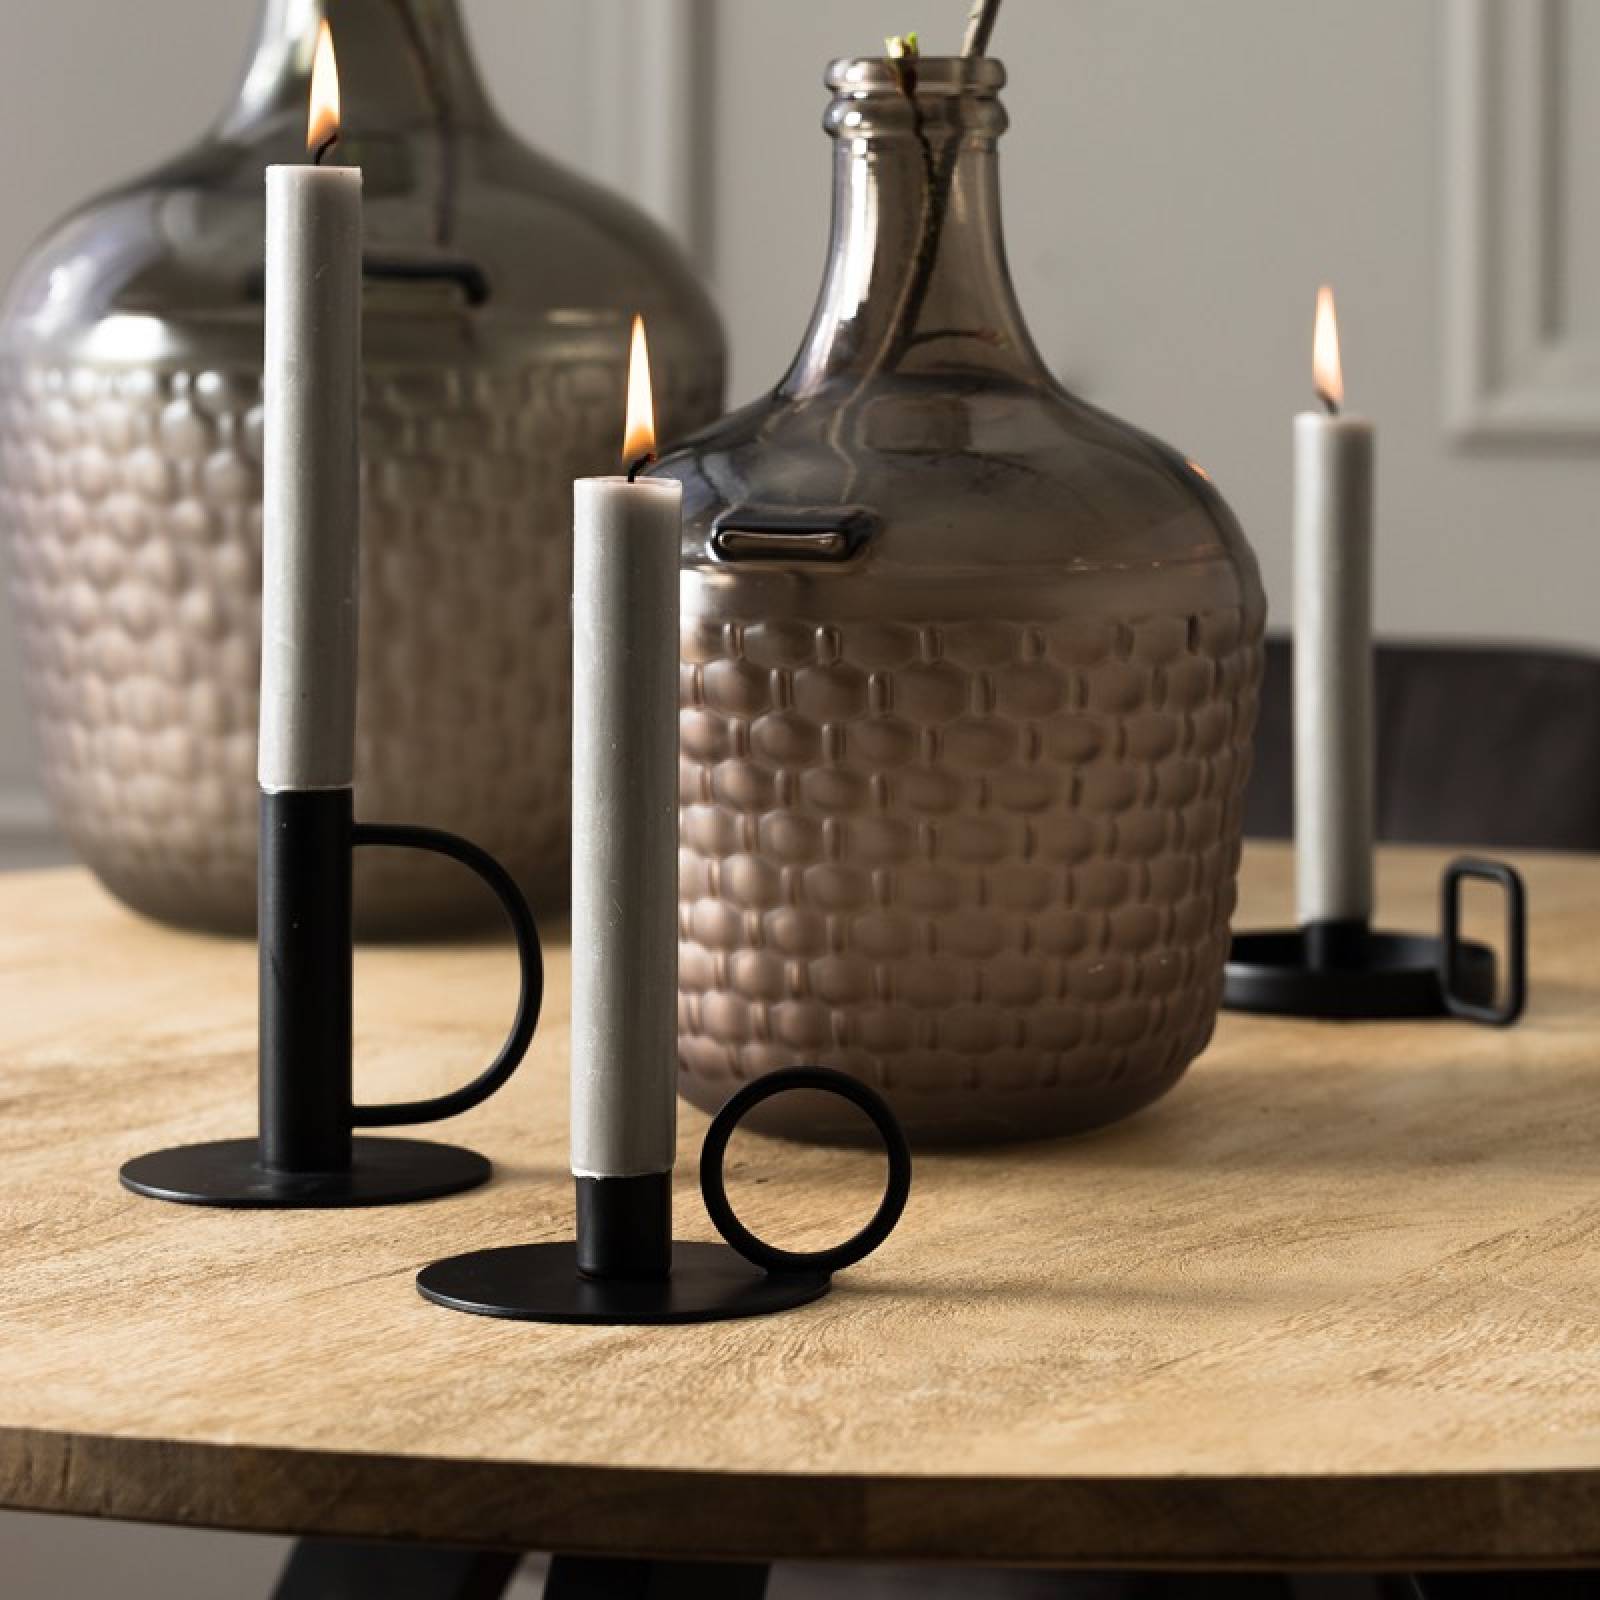 Black Candleholder Dish With Squared Handle thumbnails